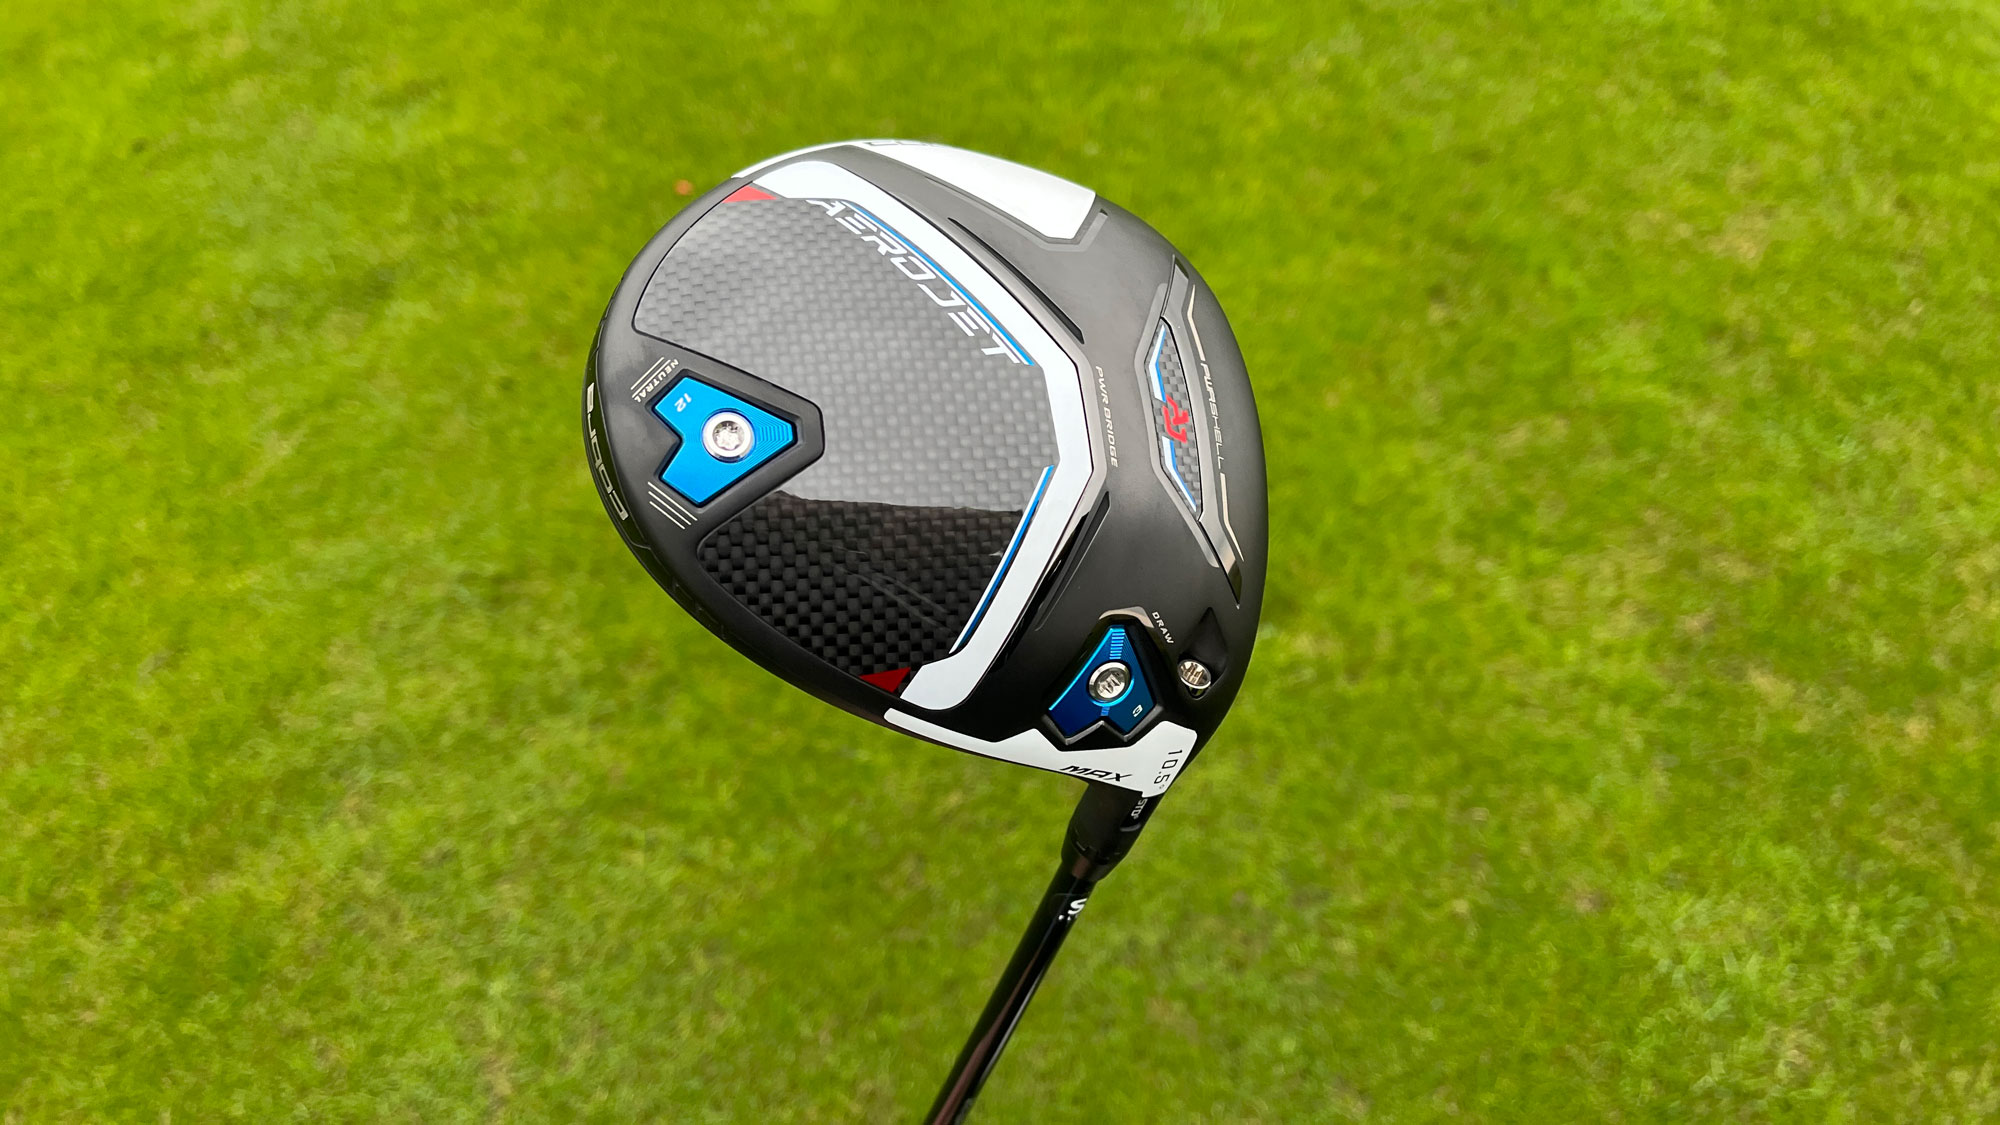 Cobra Aerojet Max Driver Review | Golf Monthly